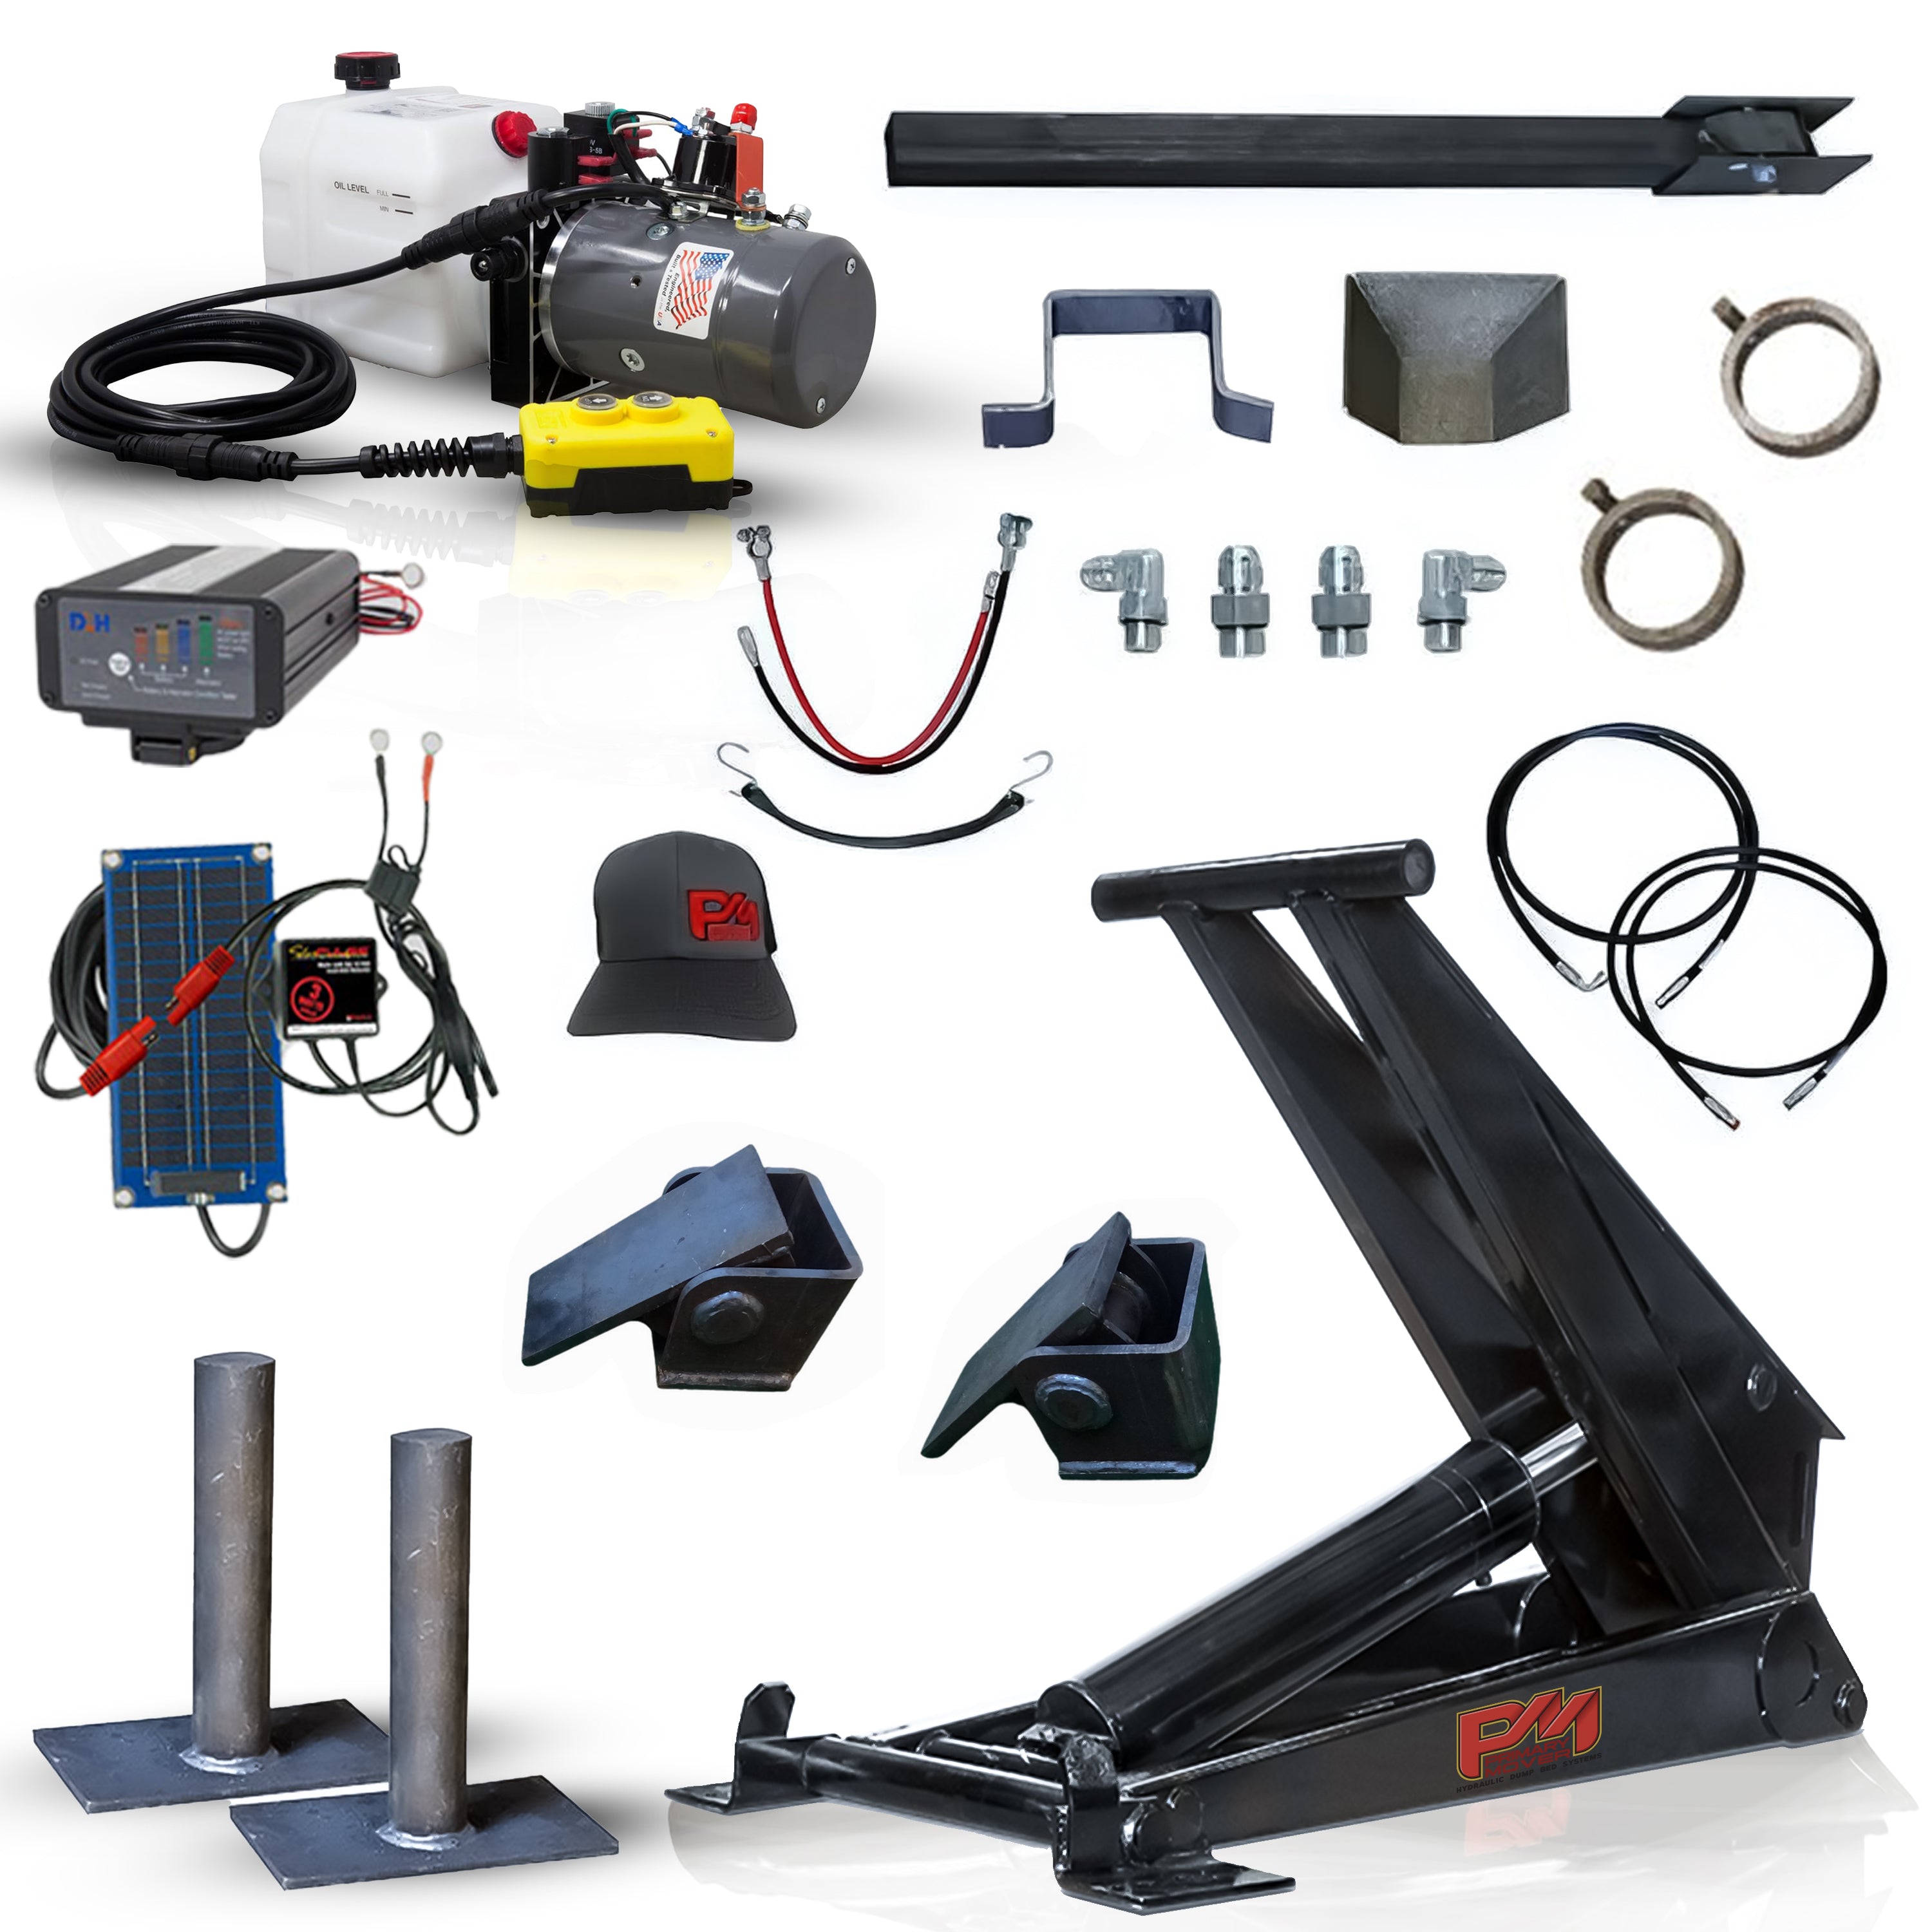 Hydraulic Scissor Hoist Kit - 12 Ton Capacity - Fits 18-24' Dump Body | PF-630. Image: Collage of machines, black car jack with tools, close-ups of devices, cables, and a logo.